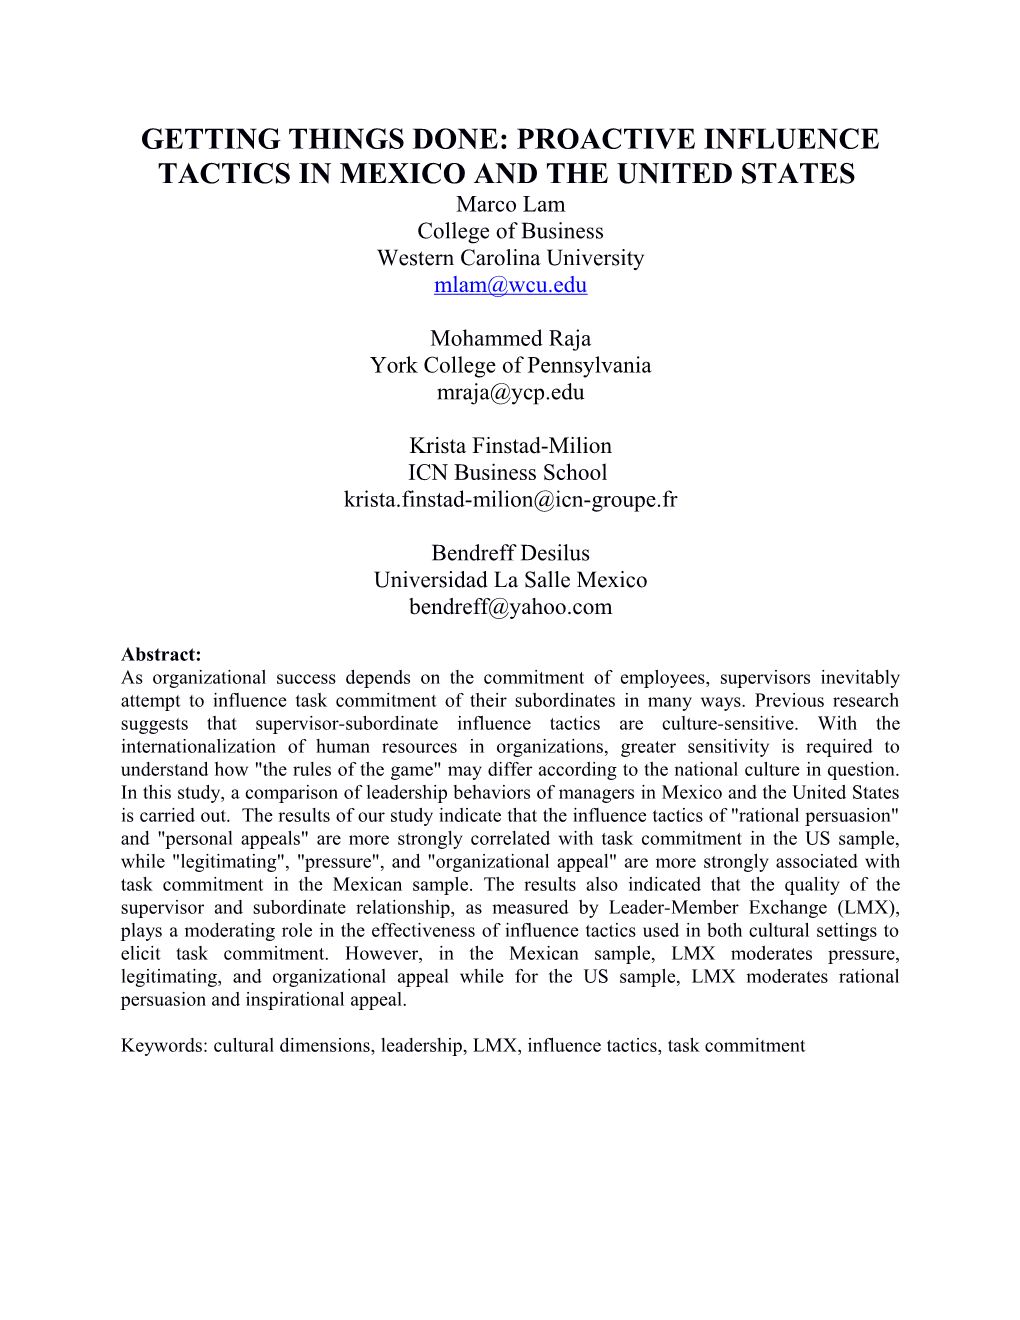 Getting Things Done: Proactive Influence Tactics in Mexico and the United States